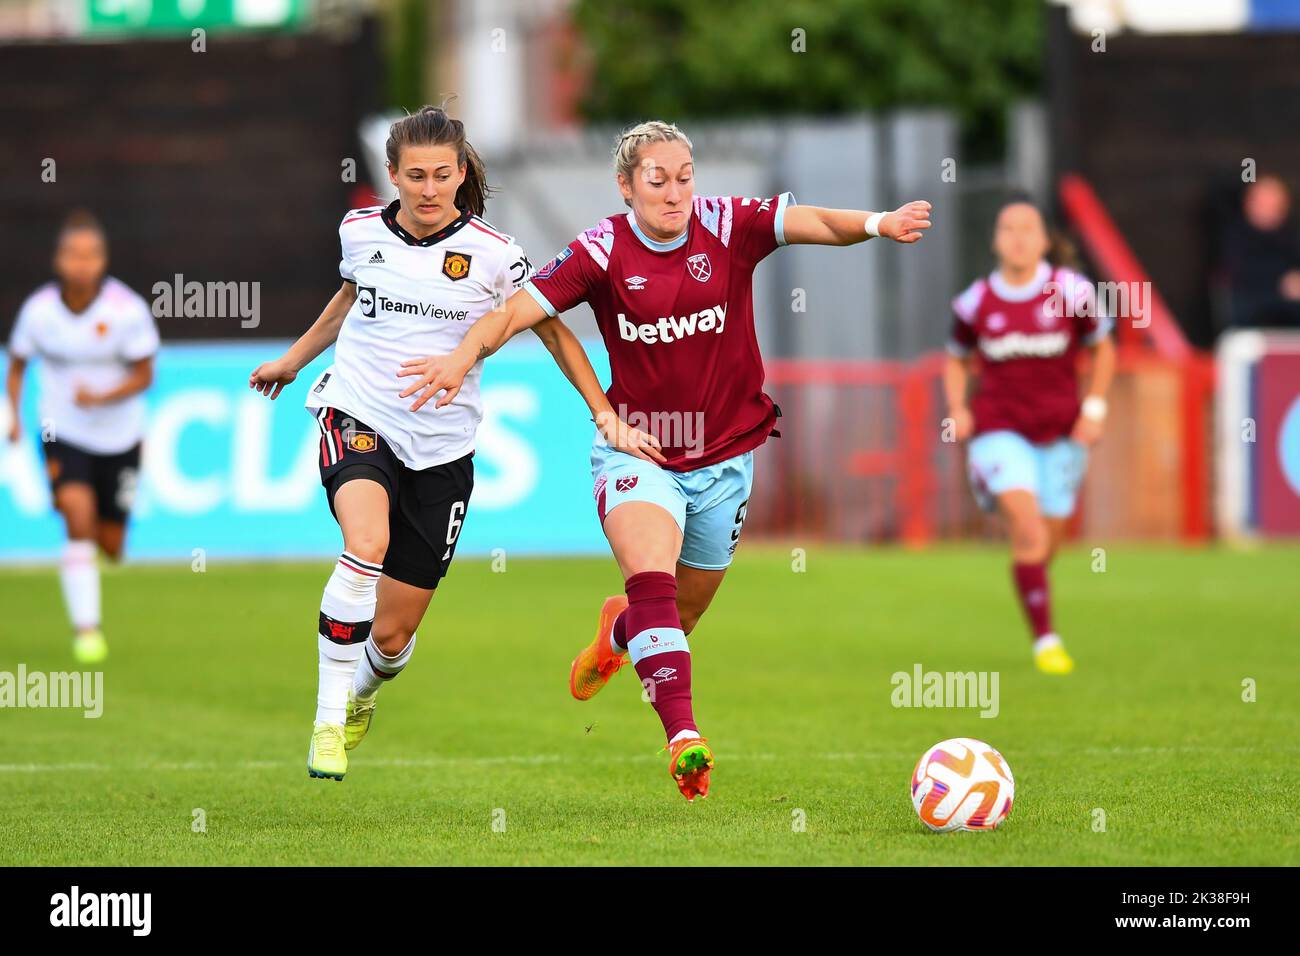 London, UK. 25th Sep, 2022. Dagenham and Redbridge, England, Sept 25 2022. Hannah Blundell (6 Manchester United) and Claudia Walker (9 West Ham United) challenge for the ball during the Barclays Womens Super League football match between West Ham United v Manchester United at Victoria Road Stadium, Dagenham, England. (Kevin Hodgson/SPP) Credit: SPP Sport Press Photo. /Alamy Live News Stock Photo